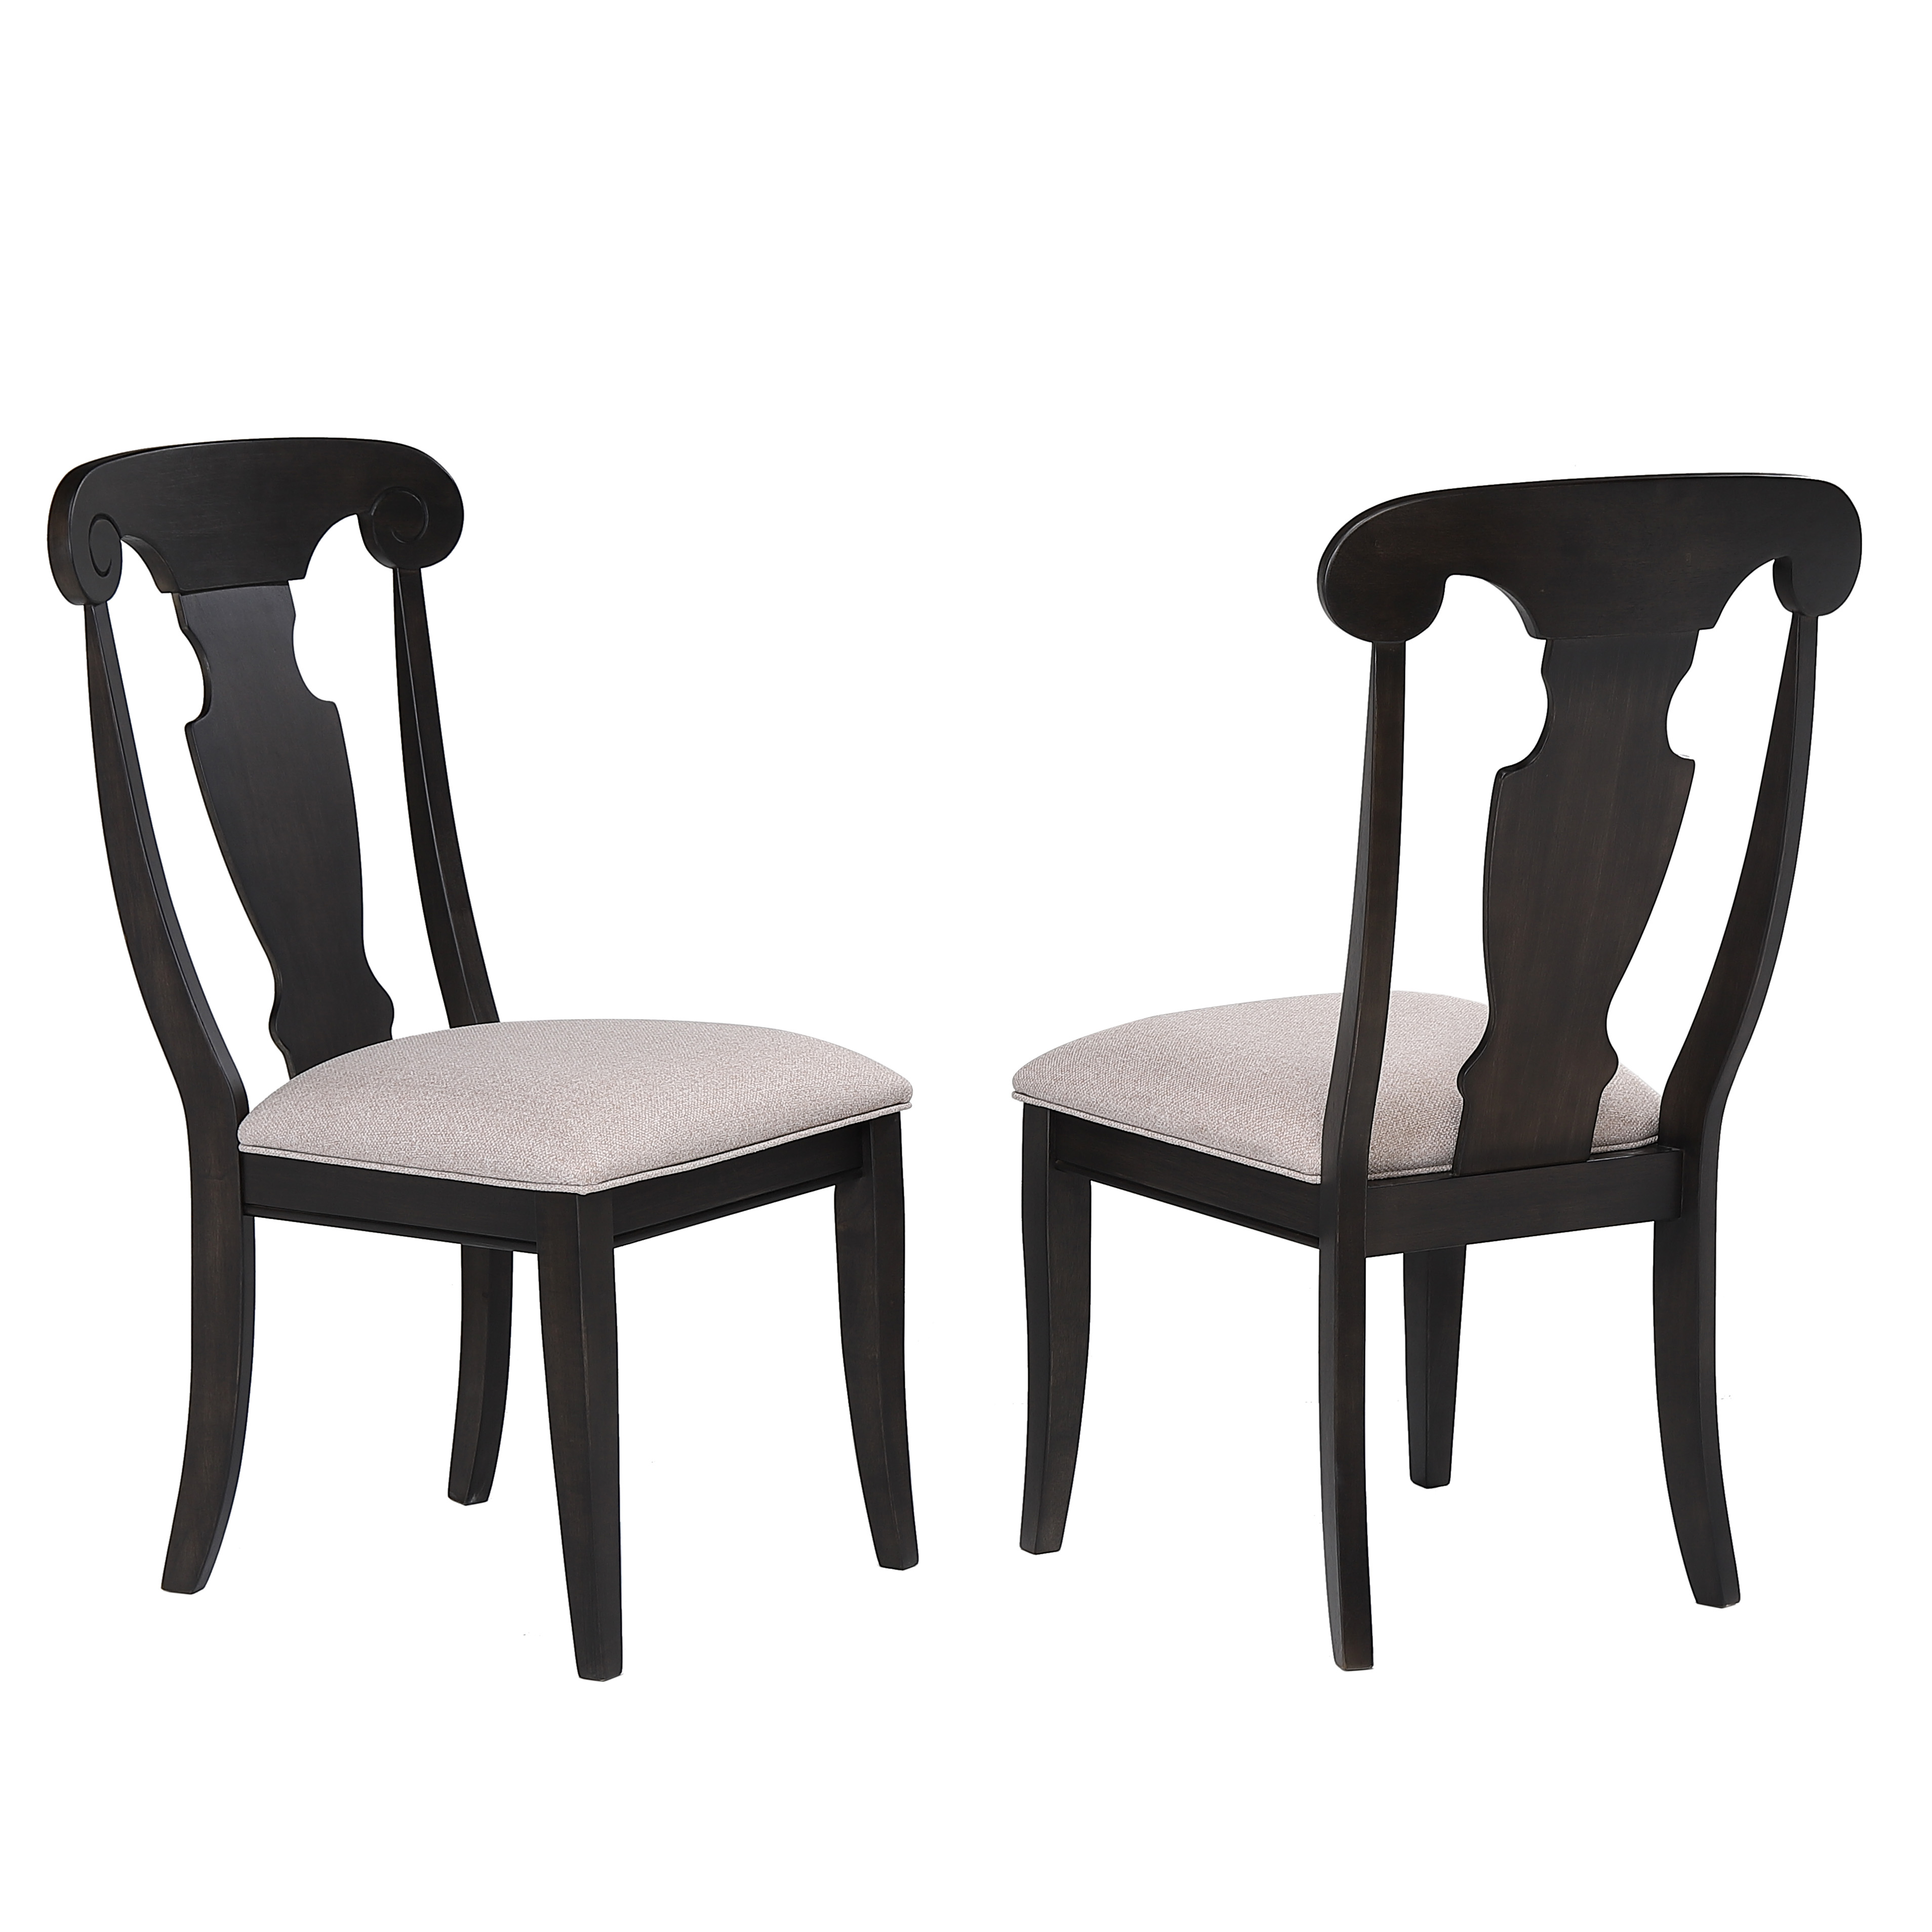 Finnegan Dining Chairs - Set of 2